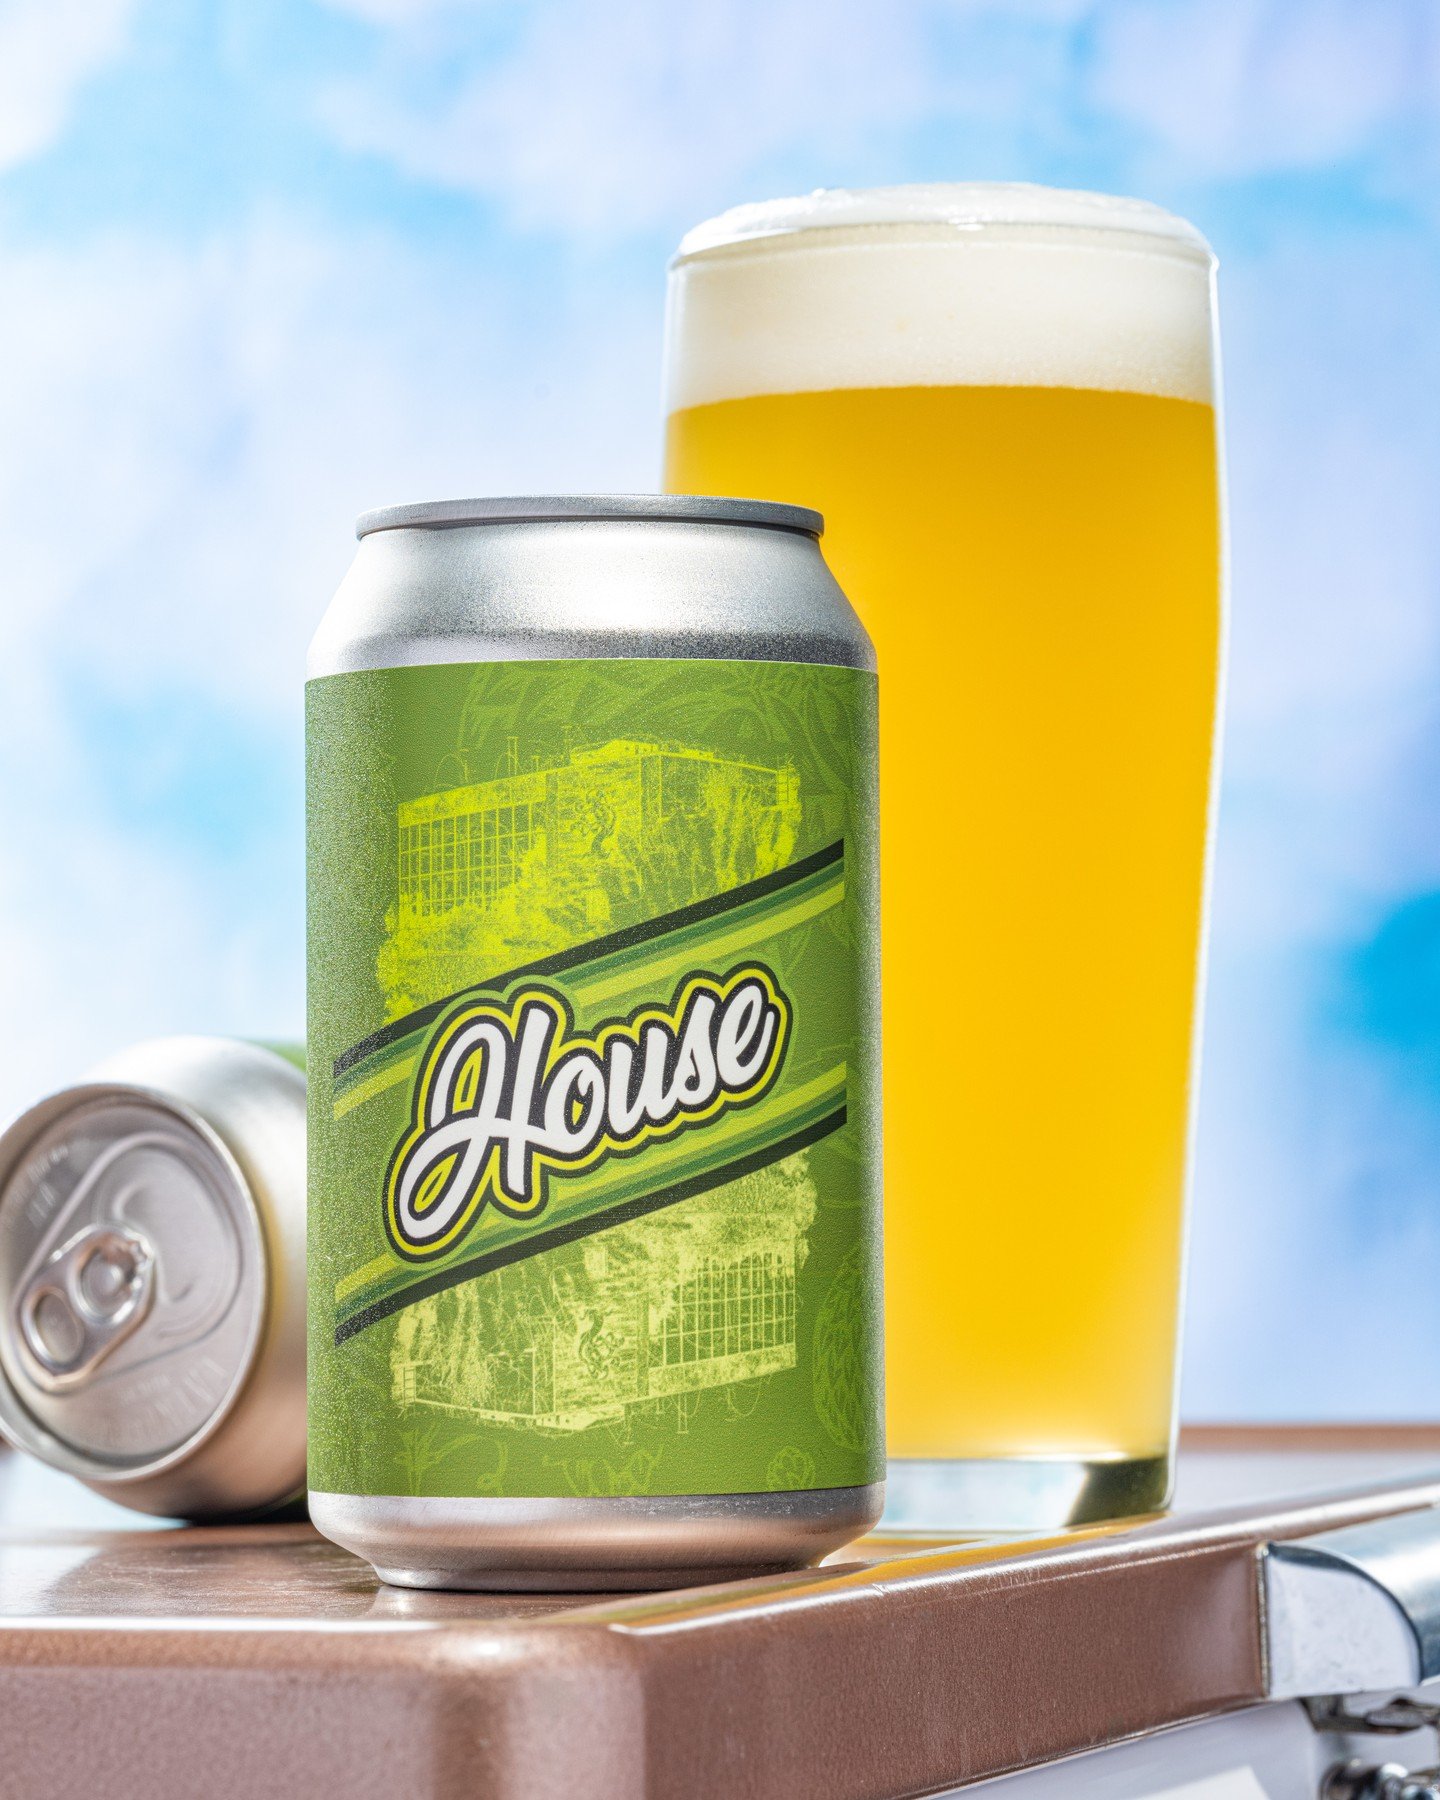 Tree House Lager Motueka.

Our House lager is crafted with Thrall Family Malt from Connecticut and finished with select Motueka.

It's easy-drinking bliss.

#productphotography #productphotodaily #photography #craftbeer #treehousebrewing #beergram #b